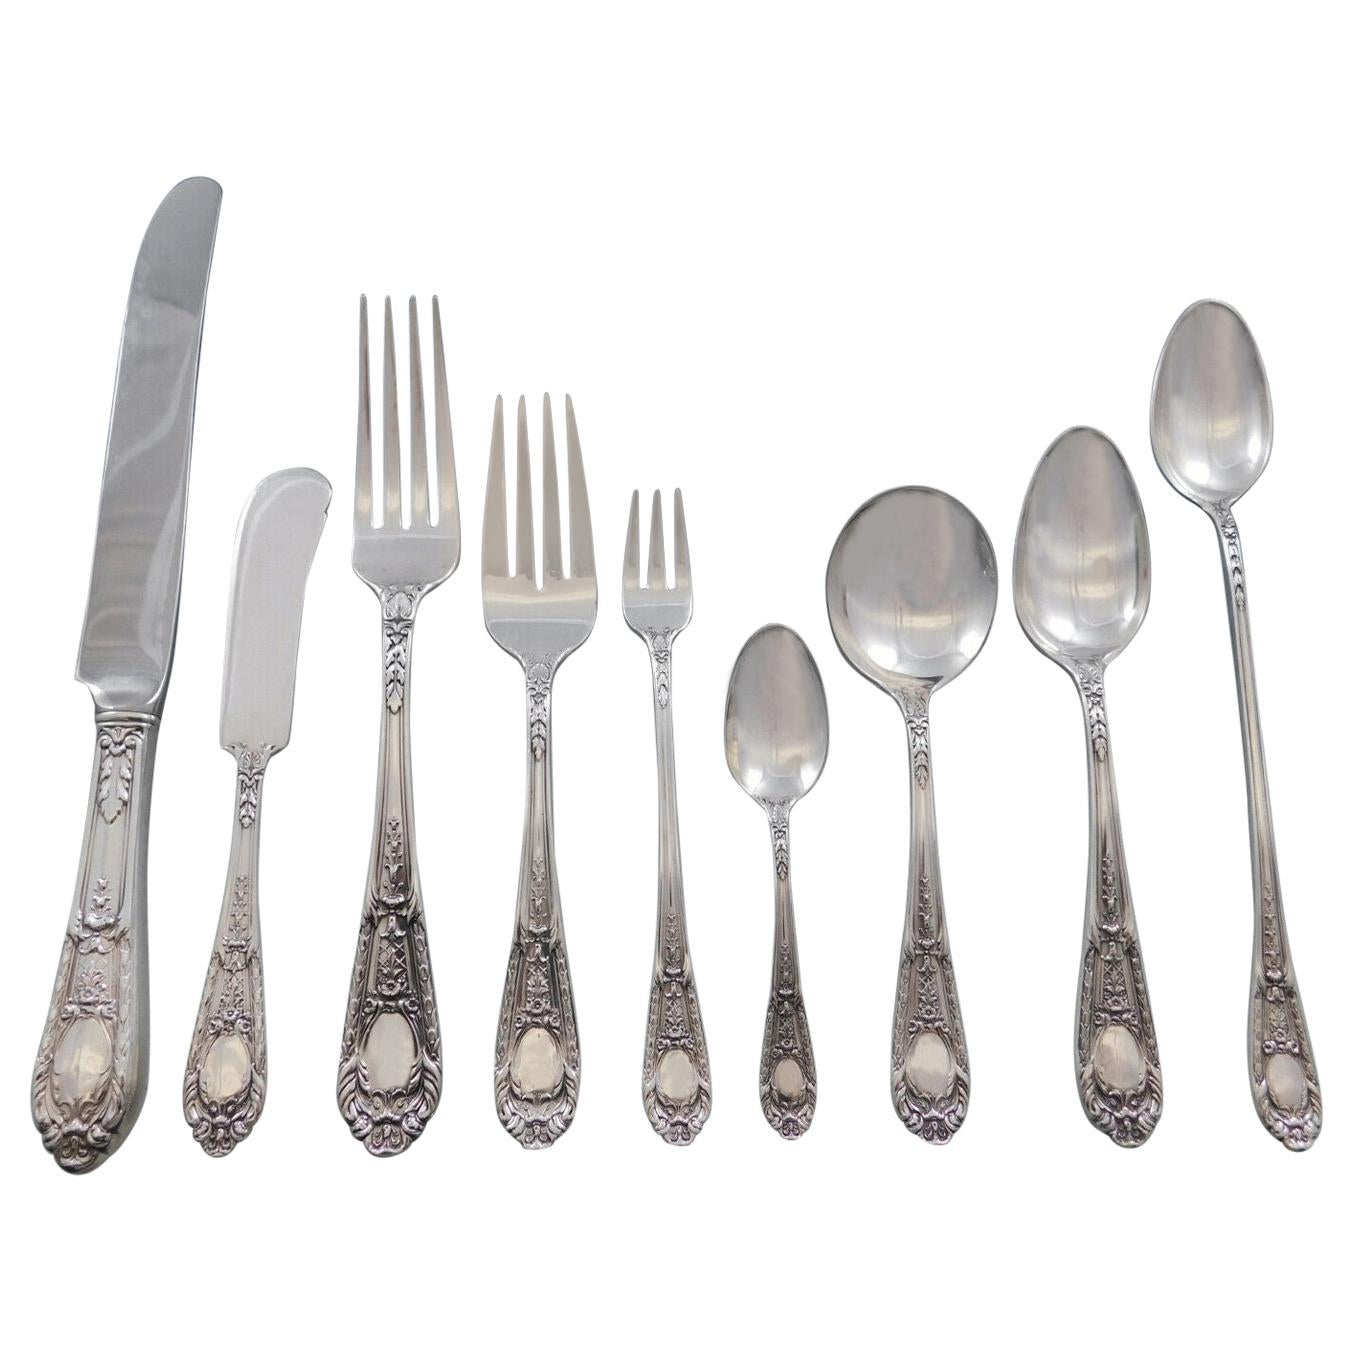 Fontaine by International Sterling Silver Flatware Set for 8 Service 83 Pieces